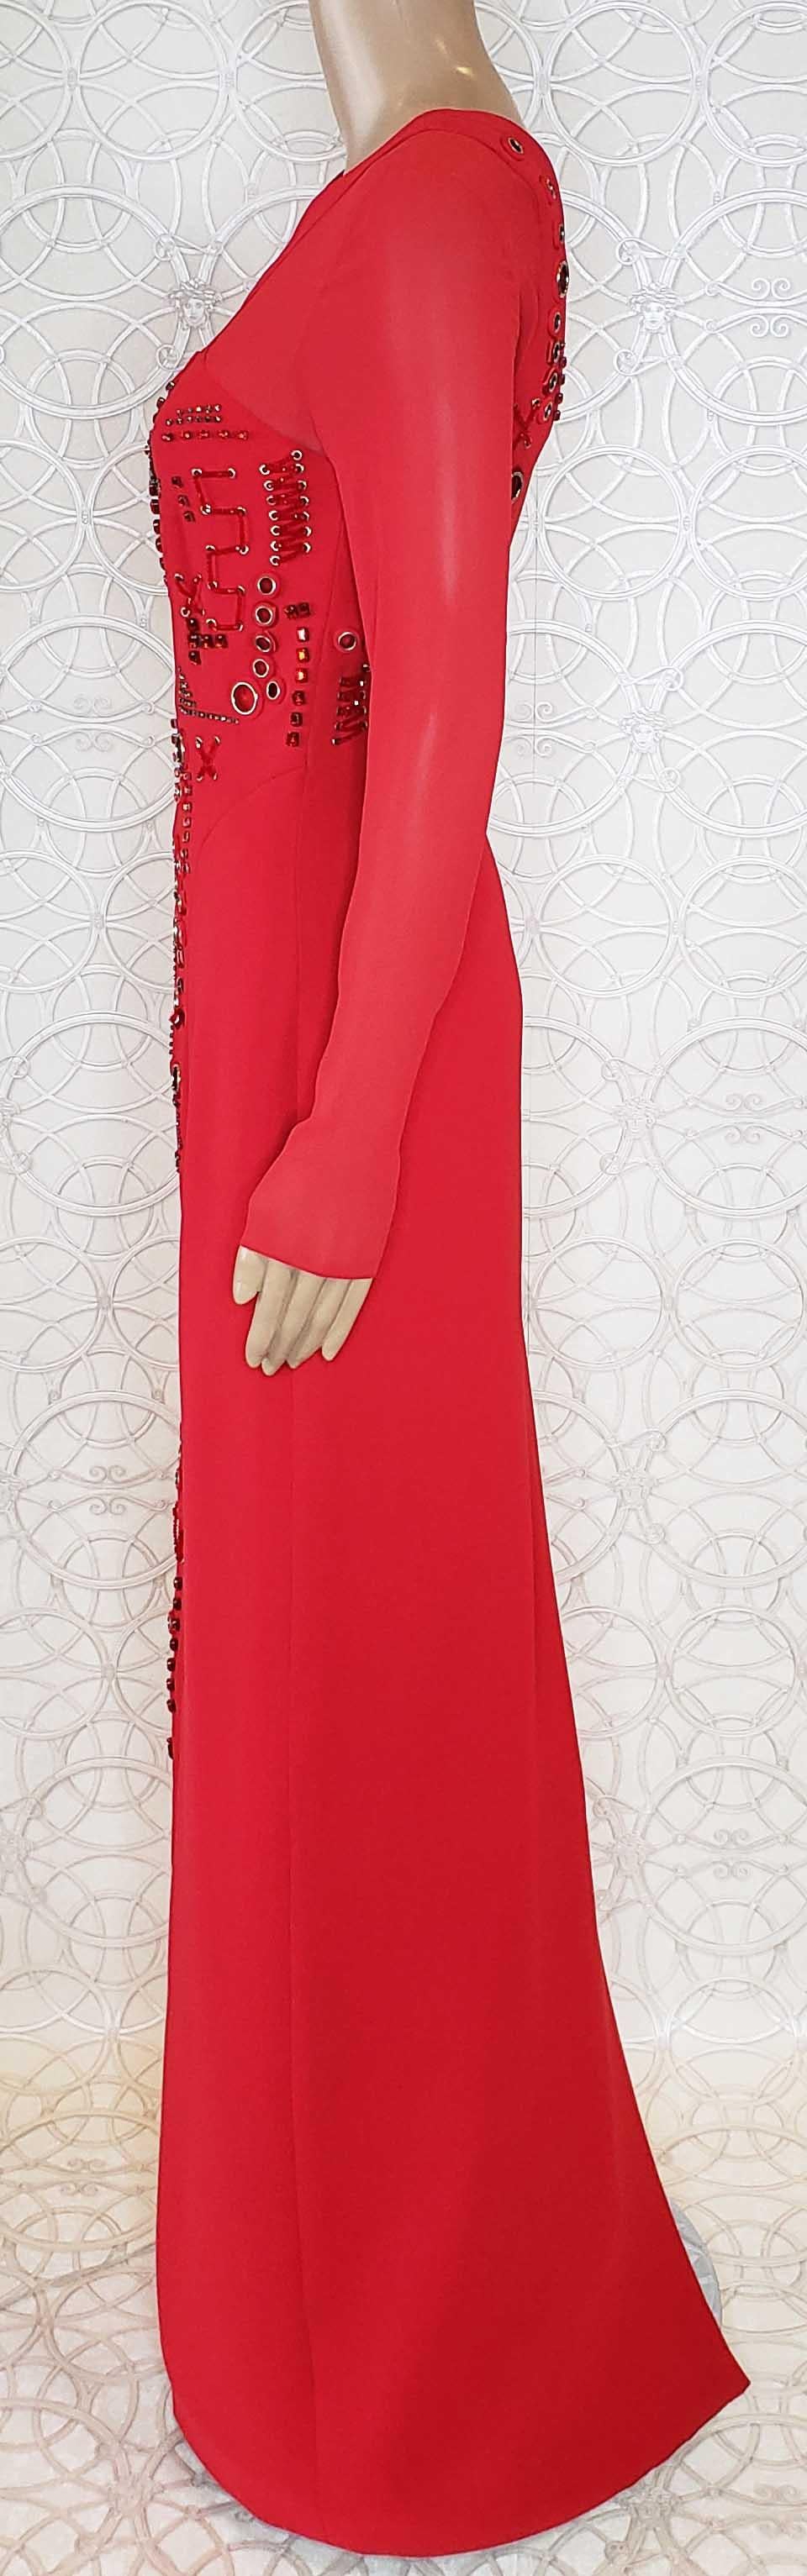 red long gown